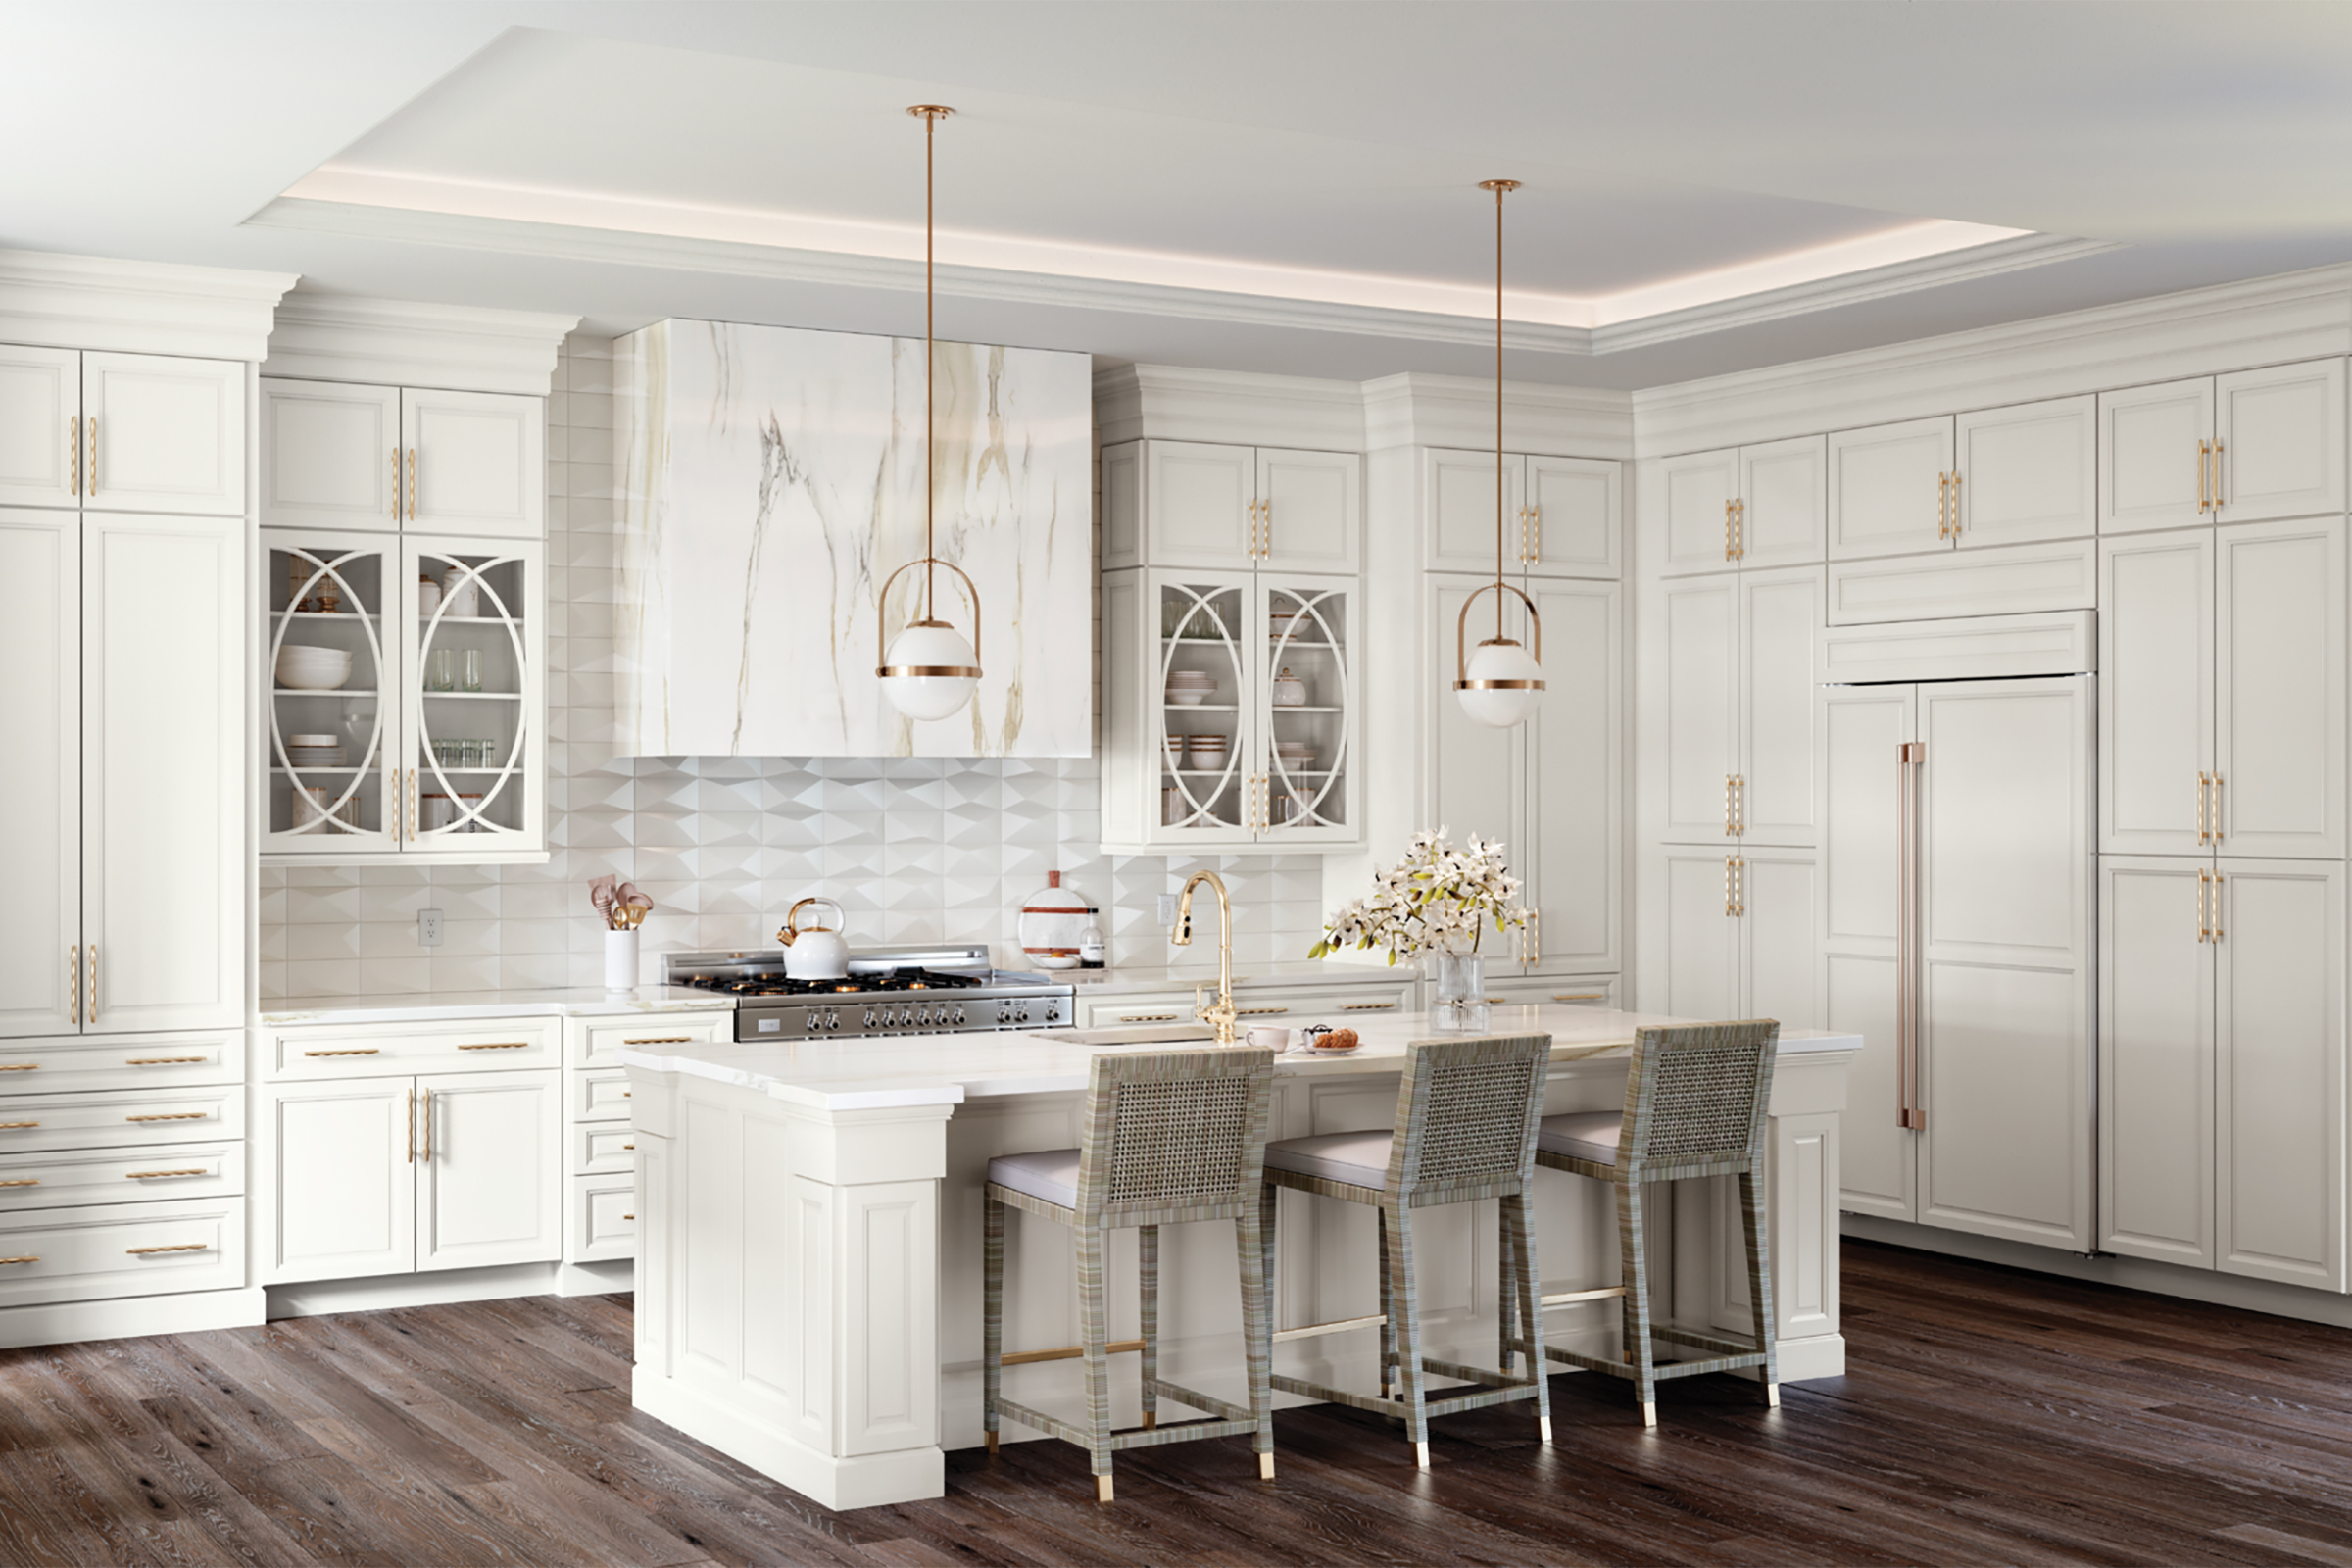 Glam kitchen design featuring KraftMaid raised-panel cabinet doors in Frost white paint, dark Oak hardwood floors, and gold accents